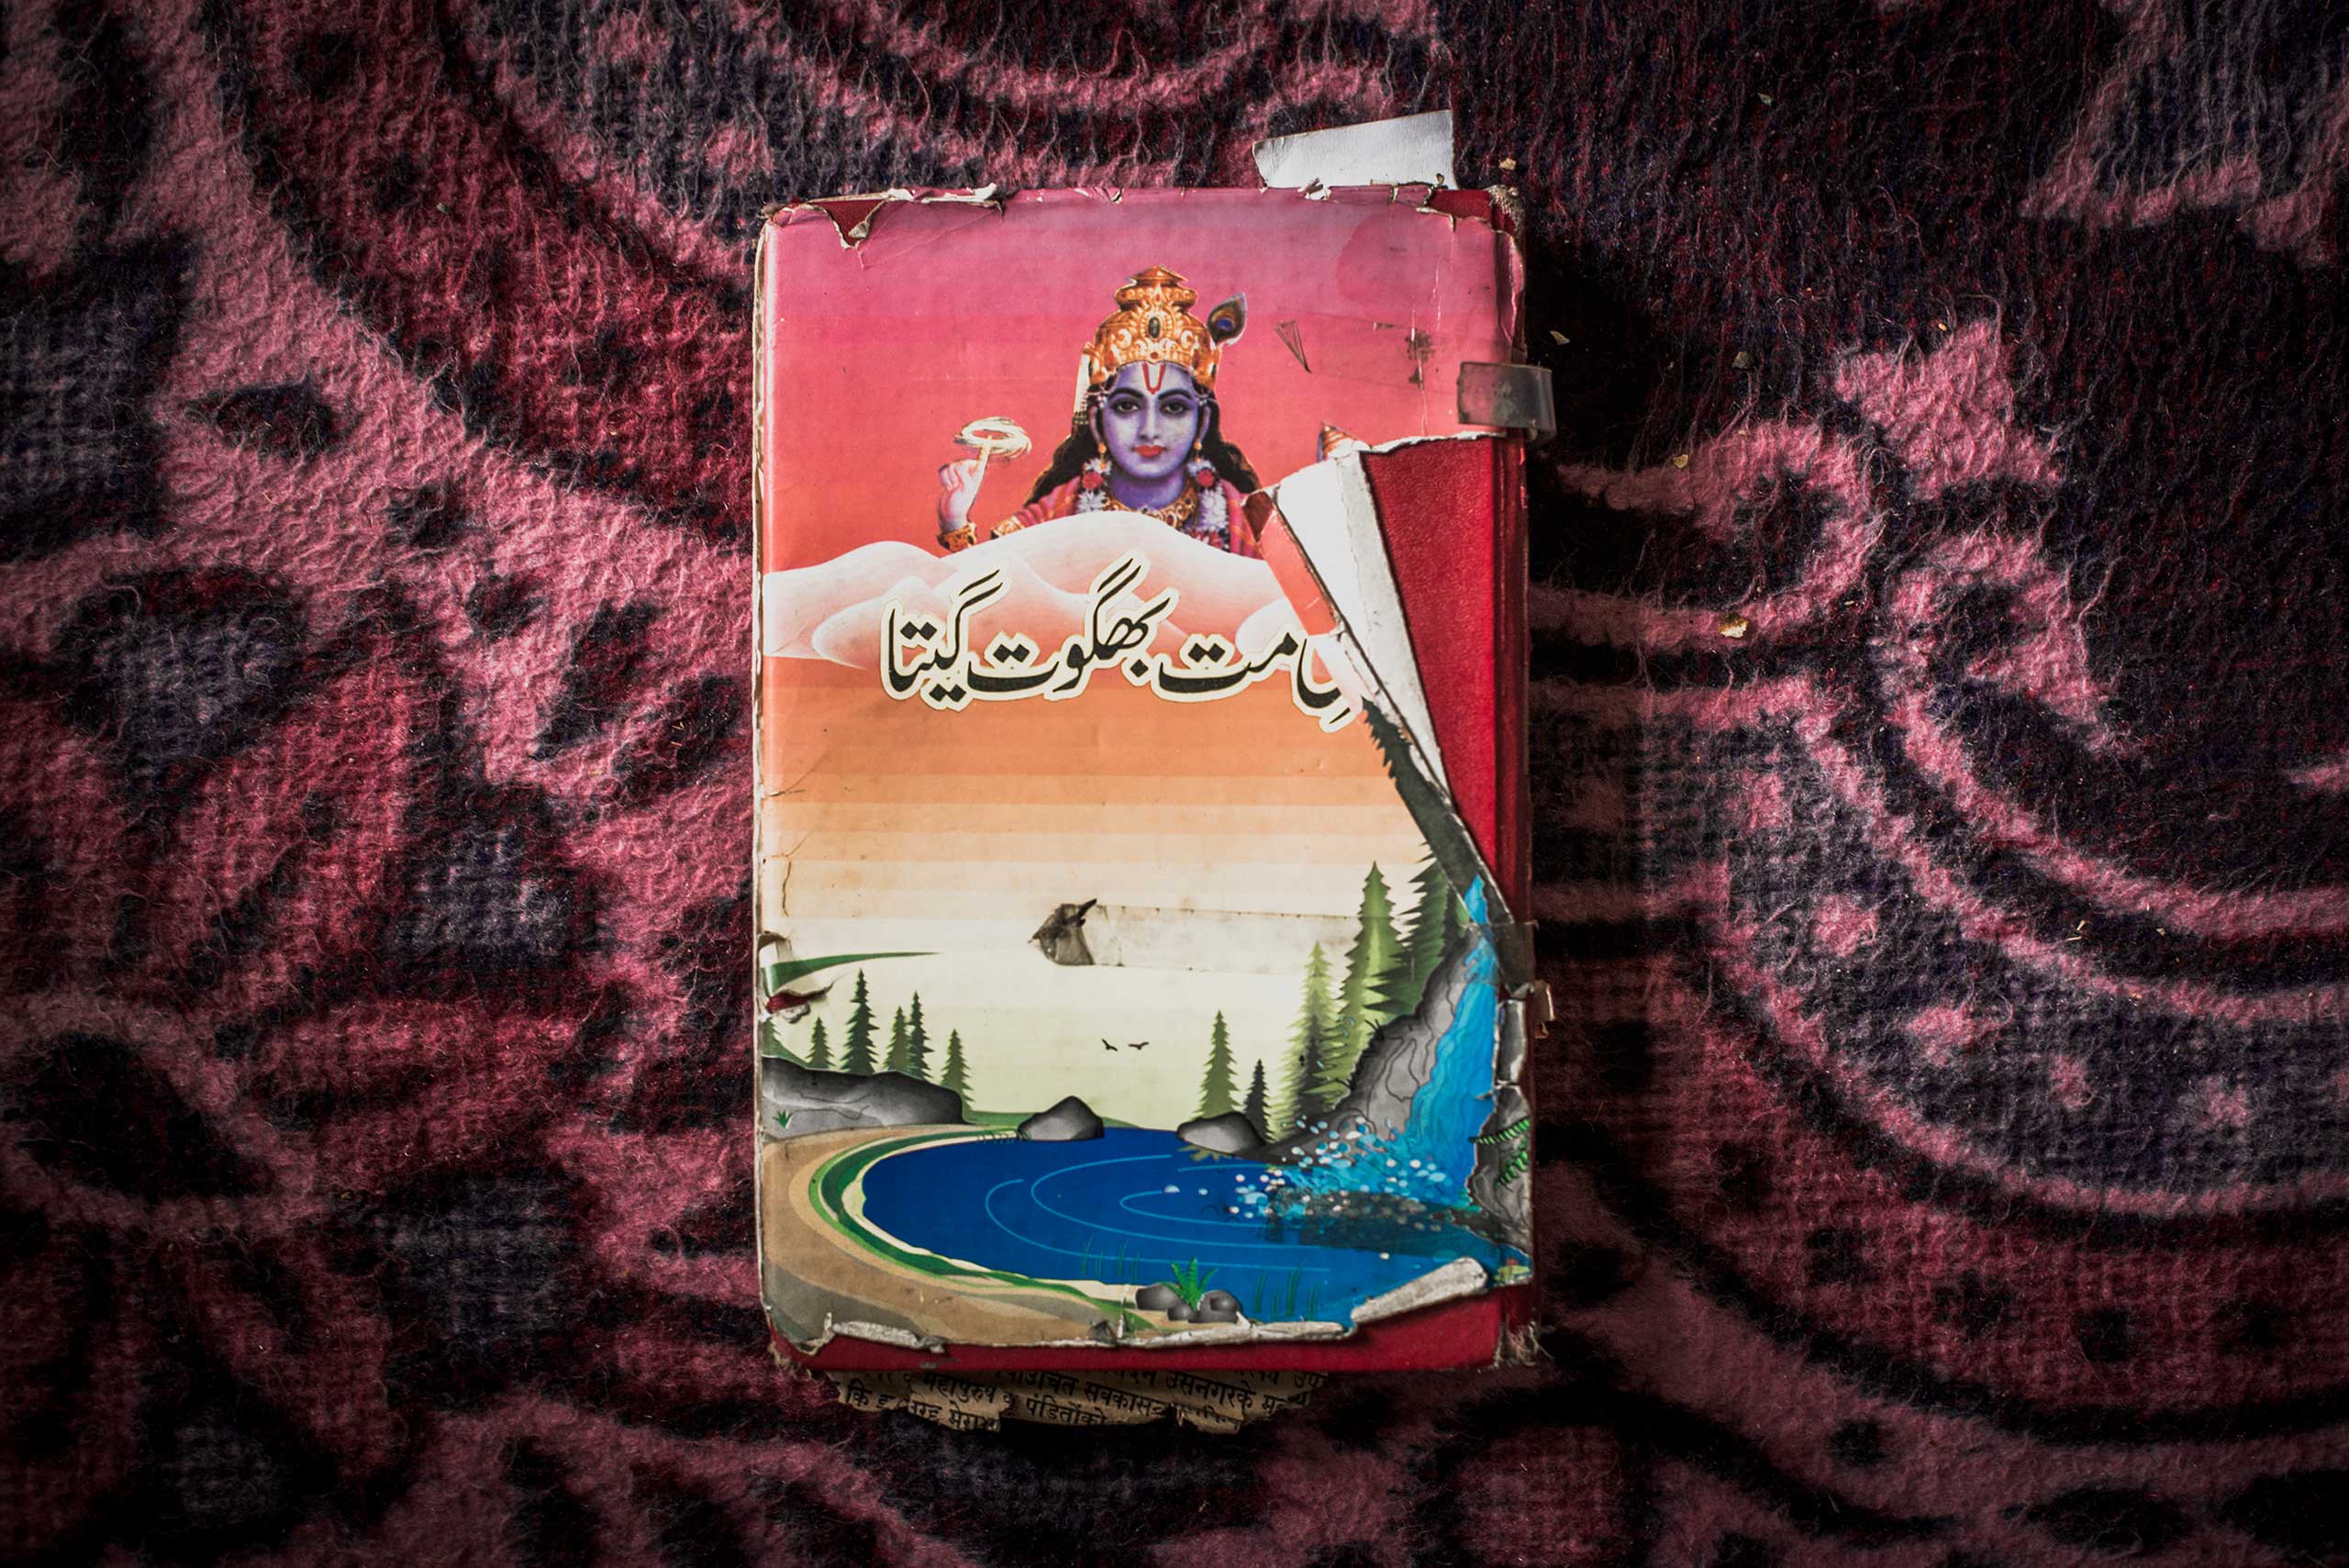 Bhagvad Gita, the holy text of the Hindus in Urdu version in Badrinath’s home. They read the book in Urdu, which shows a classic assimilation of the two cultures amongst the communities.